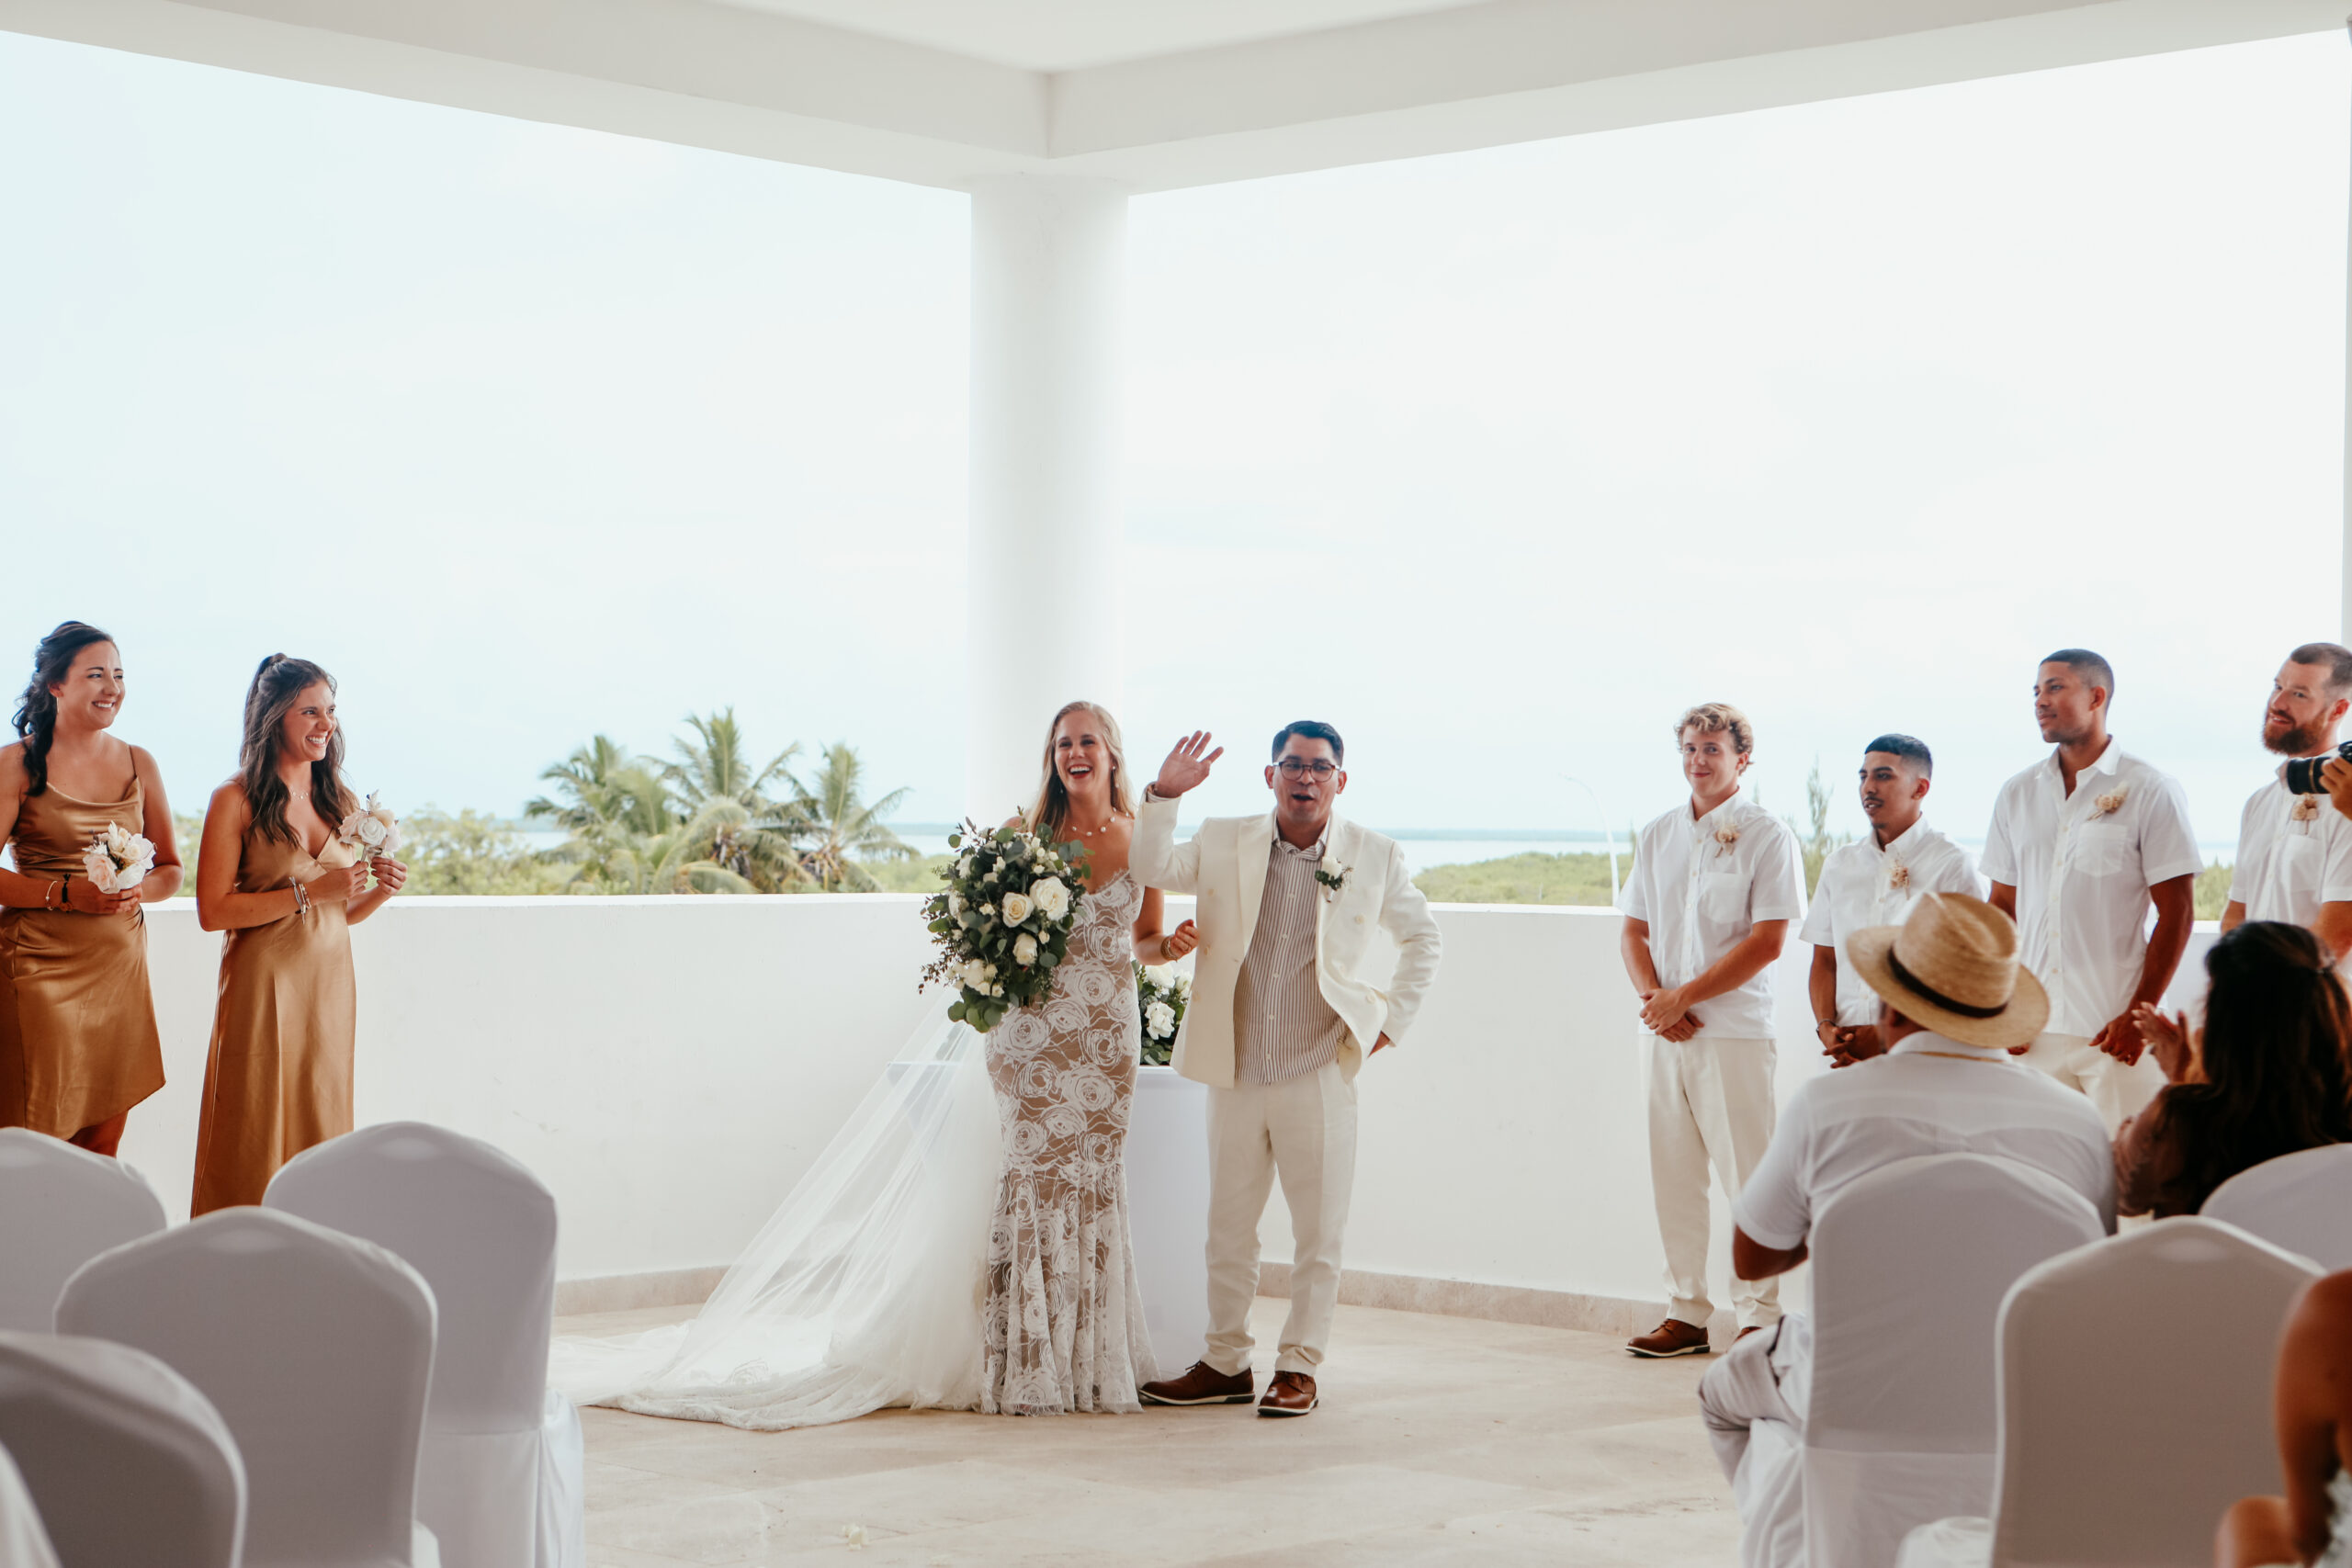 Couple getting married at Destination Wedding in Mexico